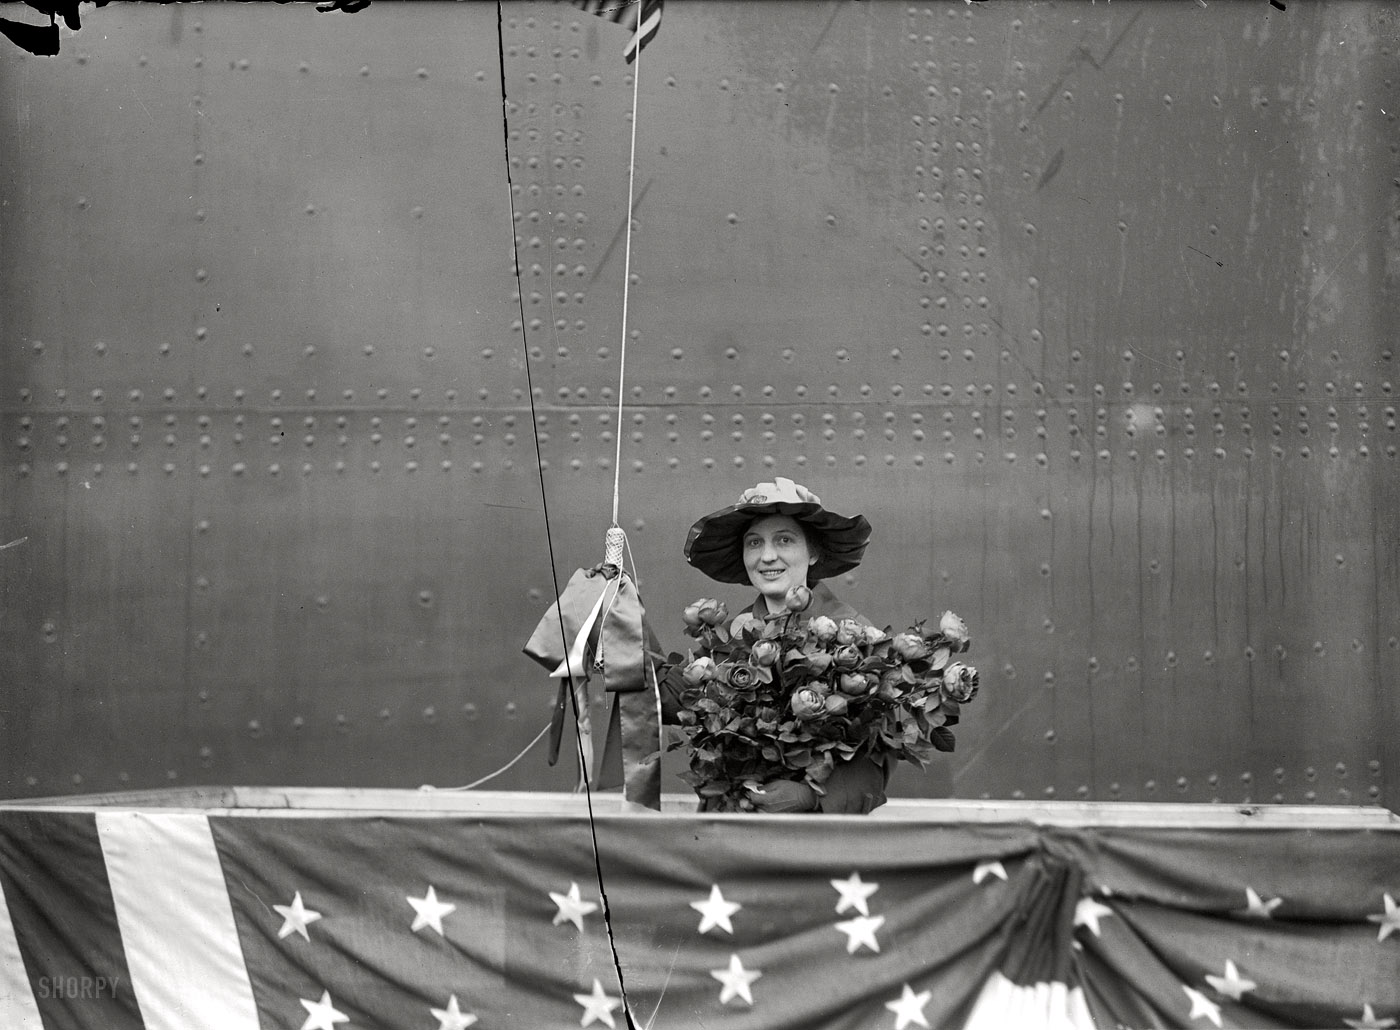 January 25, 1917. "U.S.S. Mississippi launching at Newport News. Miss Camille McBeath, sponsor." Harris & Ewing Collection glass negative. View full size.